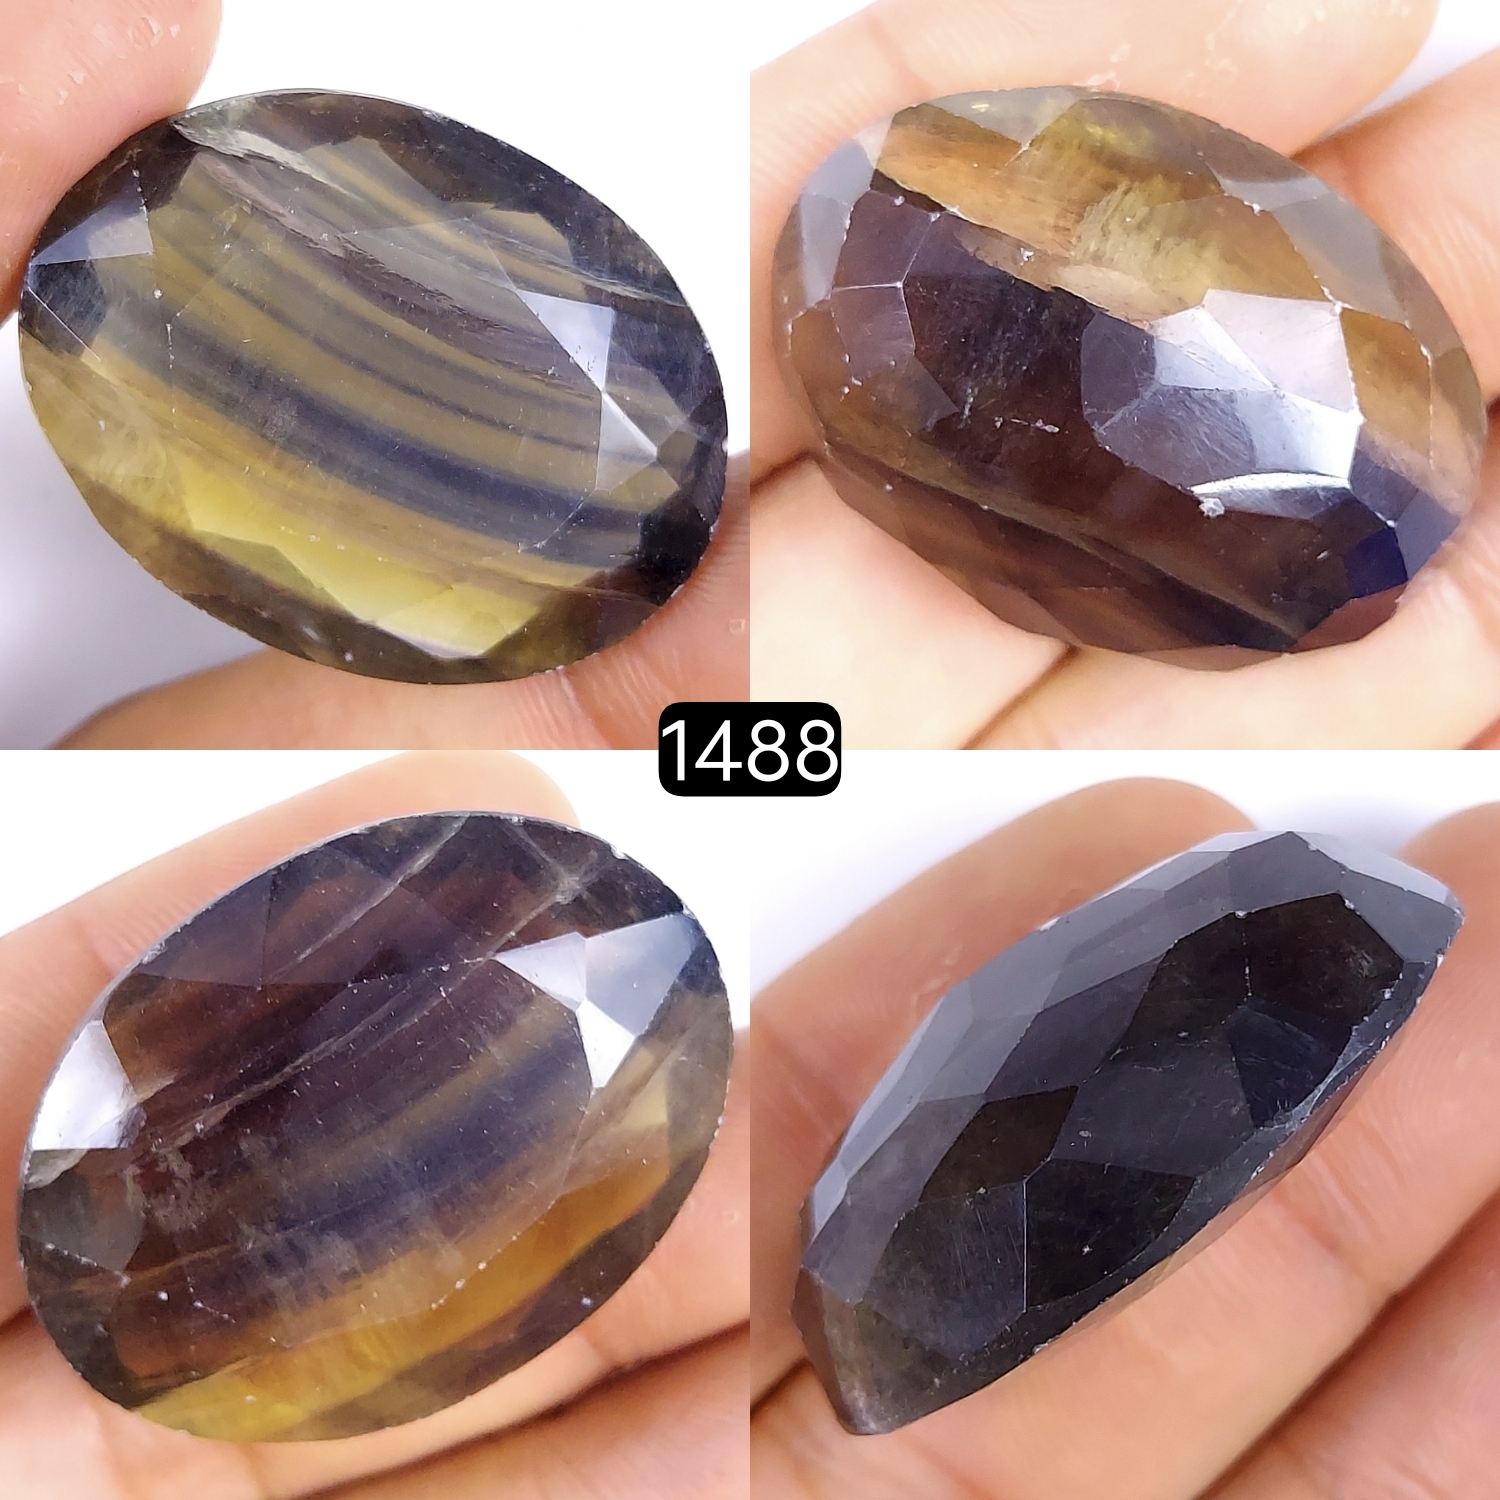 1Pc 125Cts Natural Multi Fluorite Faceted Cabochon Gemstone Oval Shape Crystal 38x28mm#1488